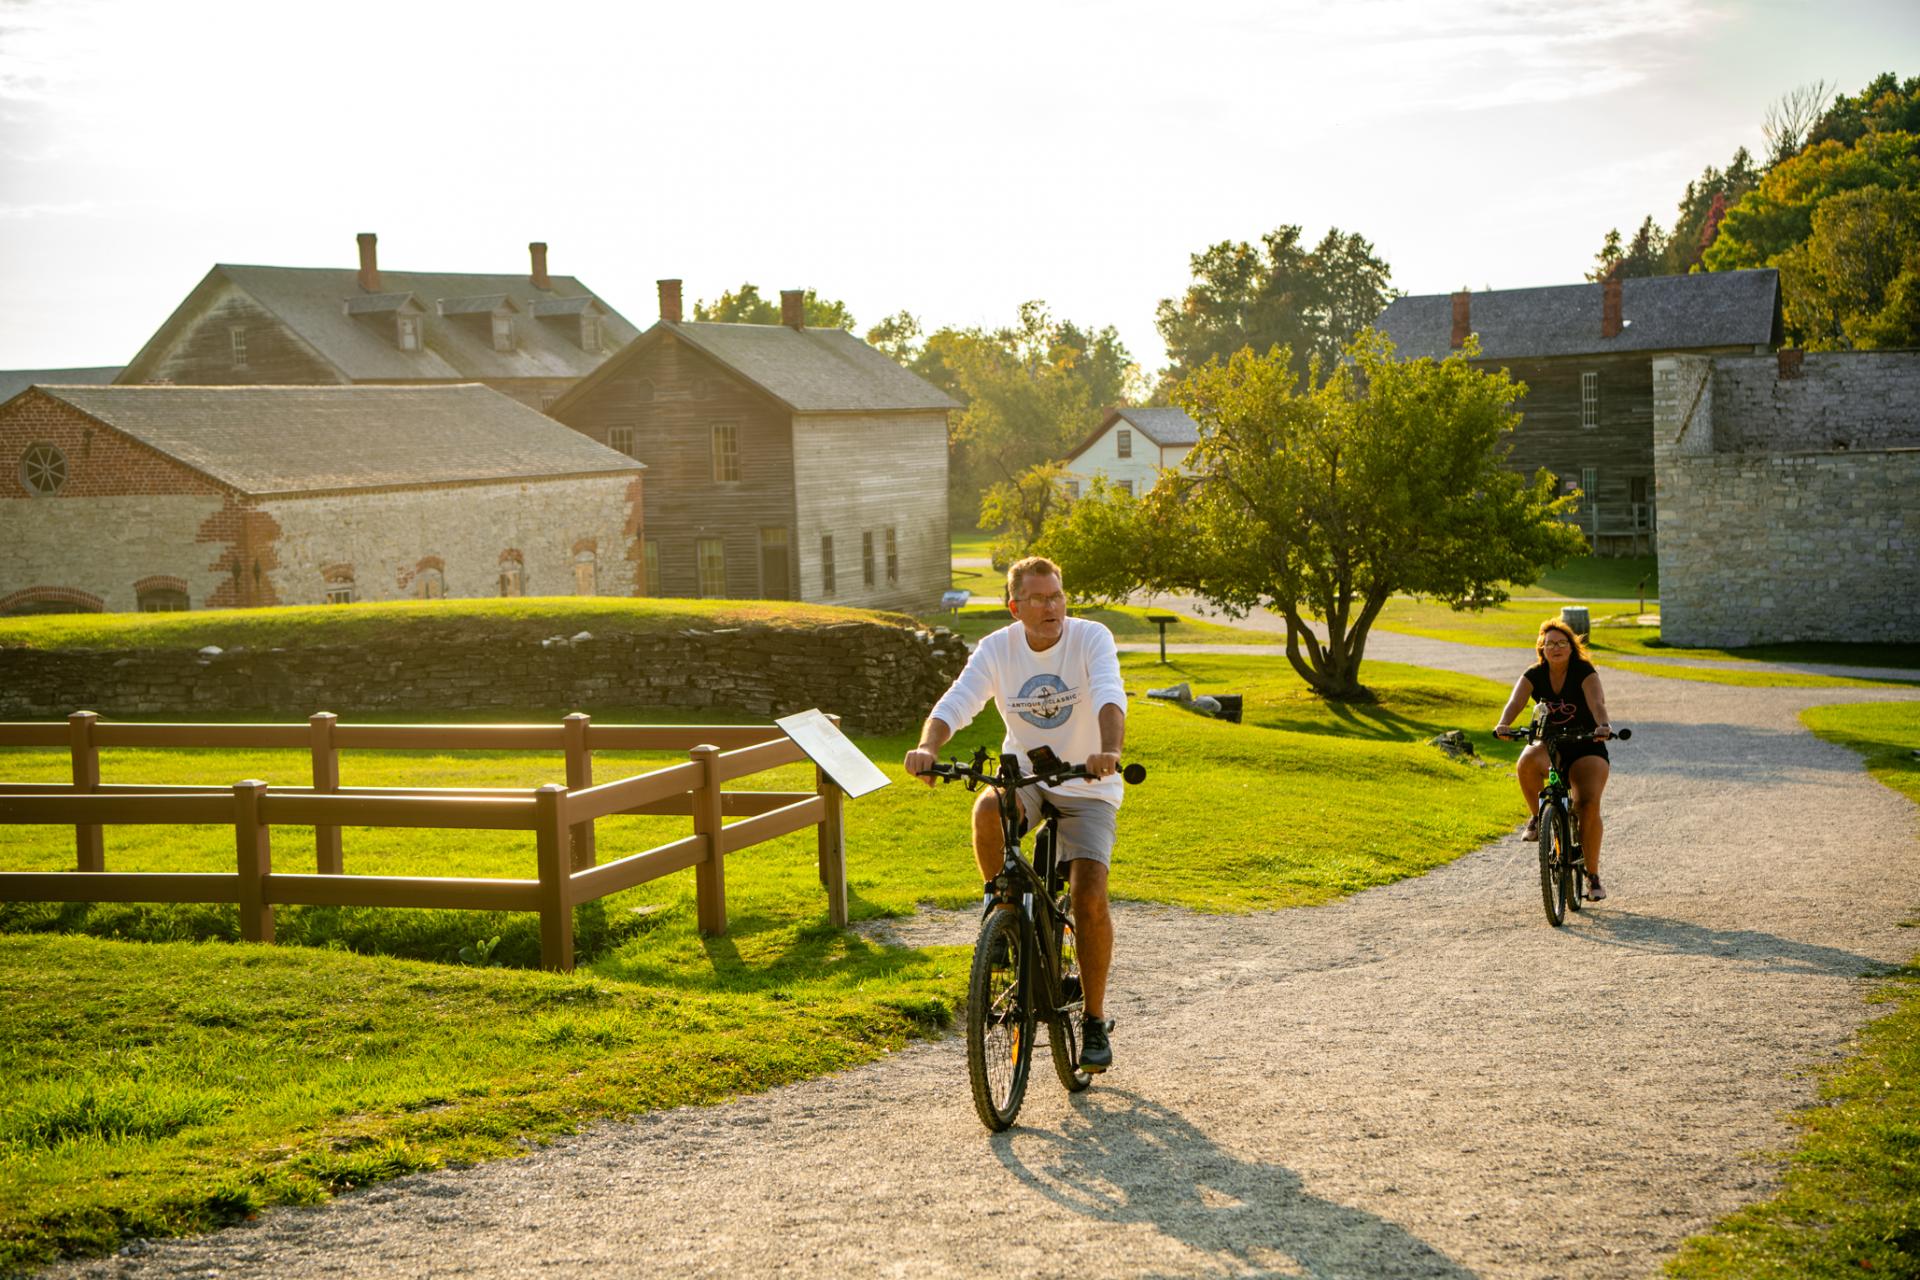 Header image featuring bikers enjoying the scenic trails in Fayette